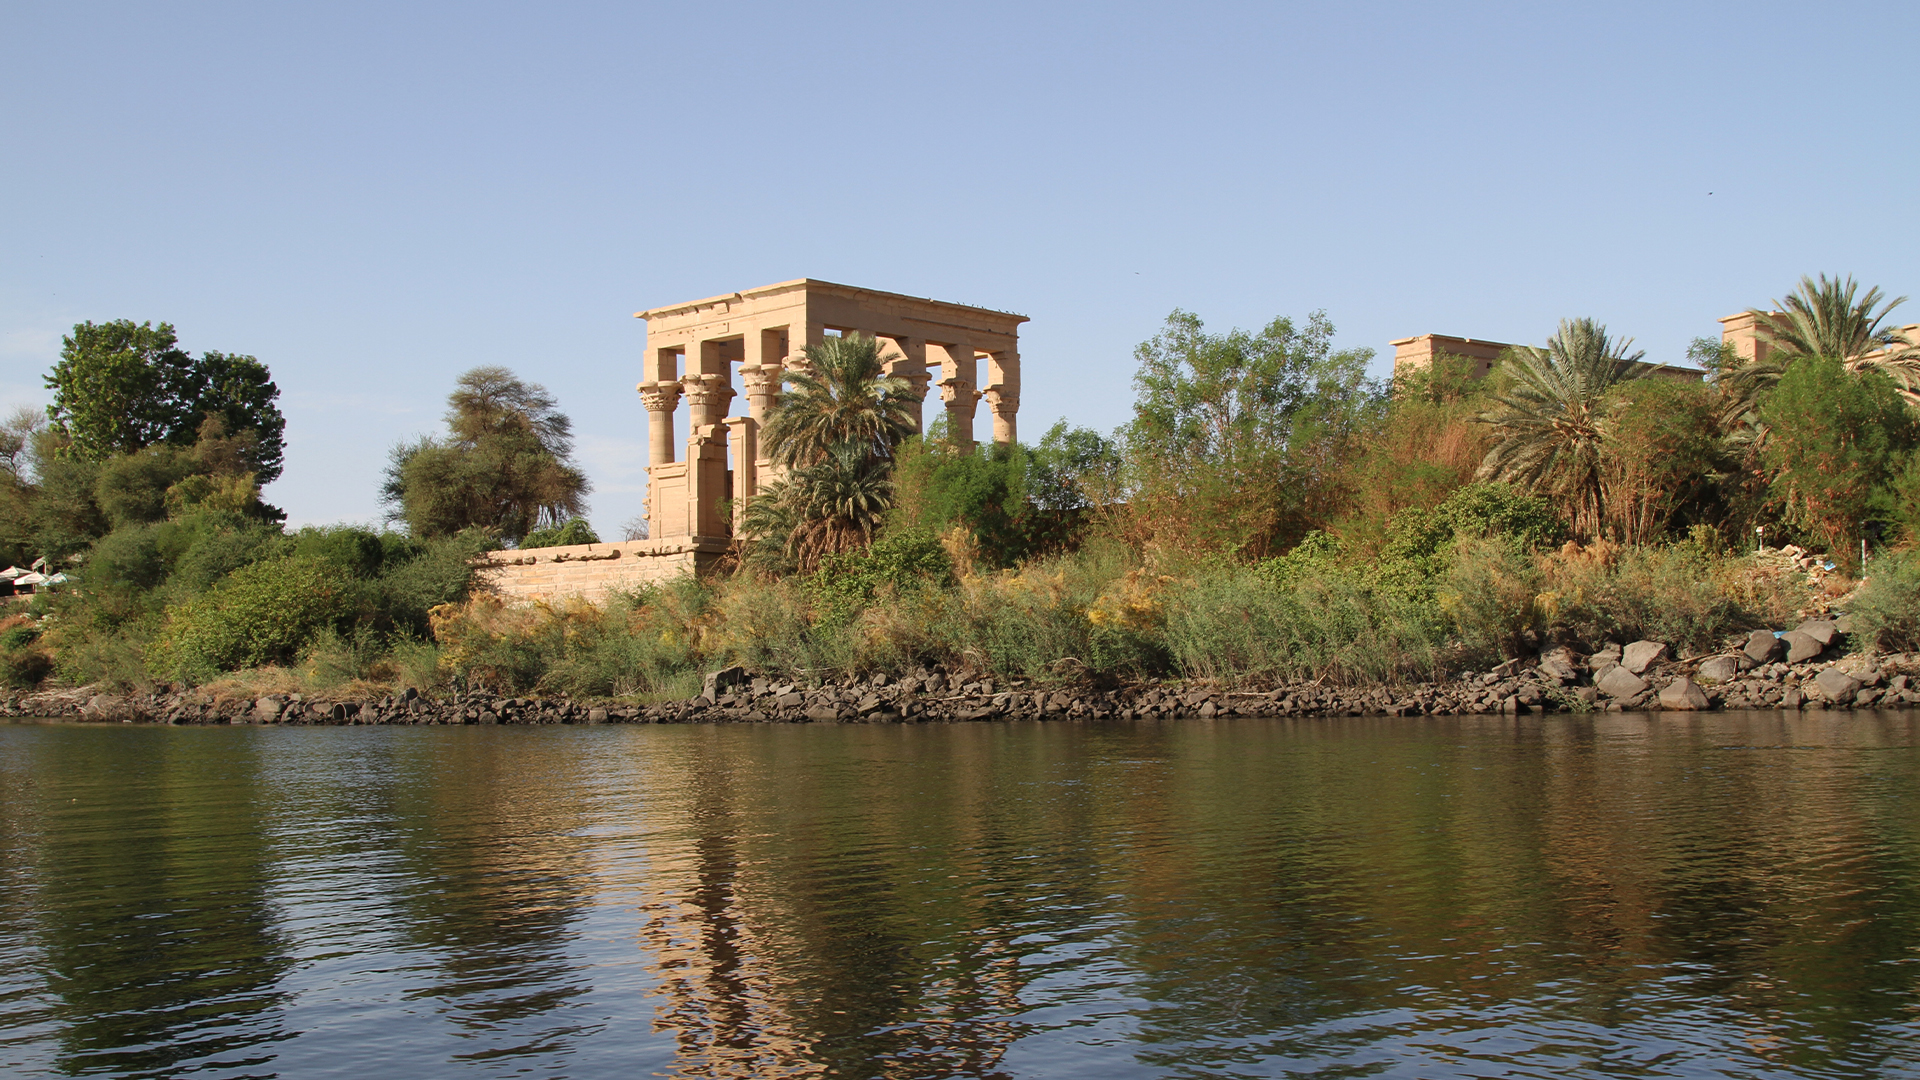 The Nile: 5000 Years of History